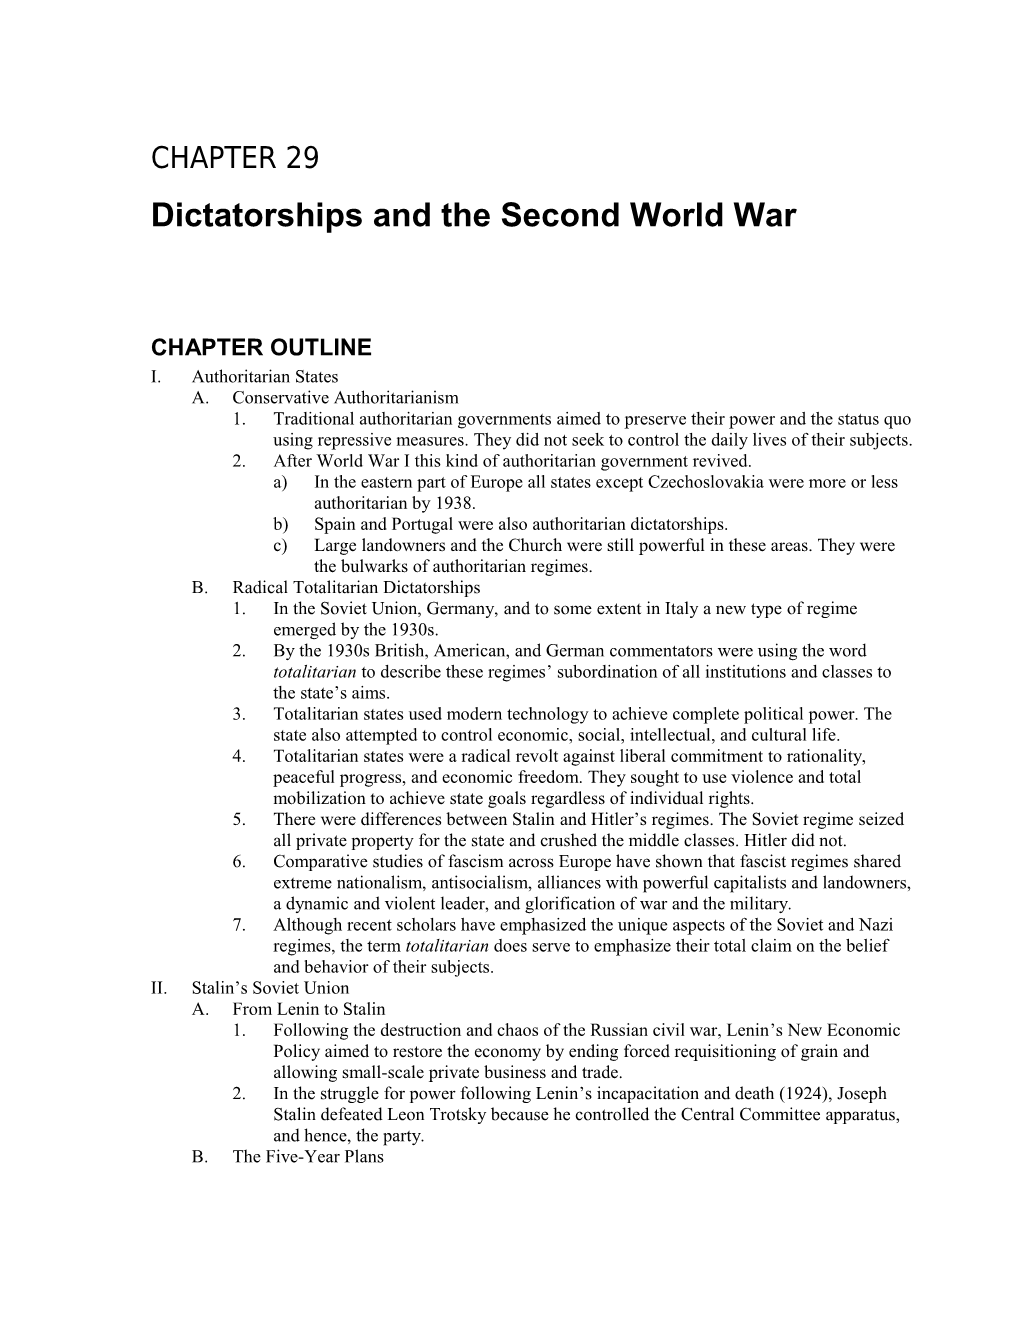 Chapter 29: Dictatorships and the Second World War 1